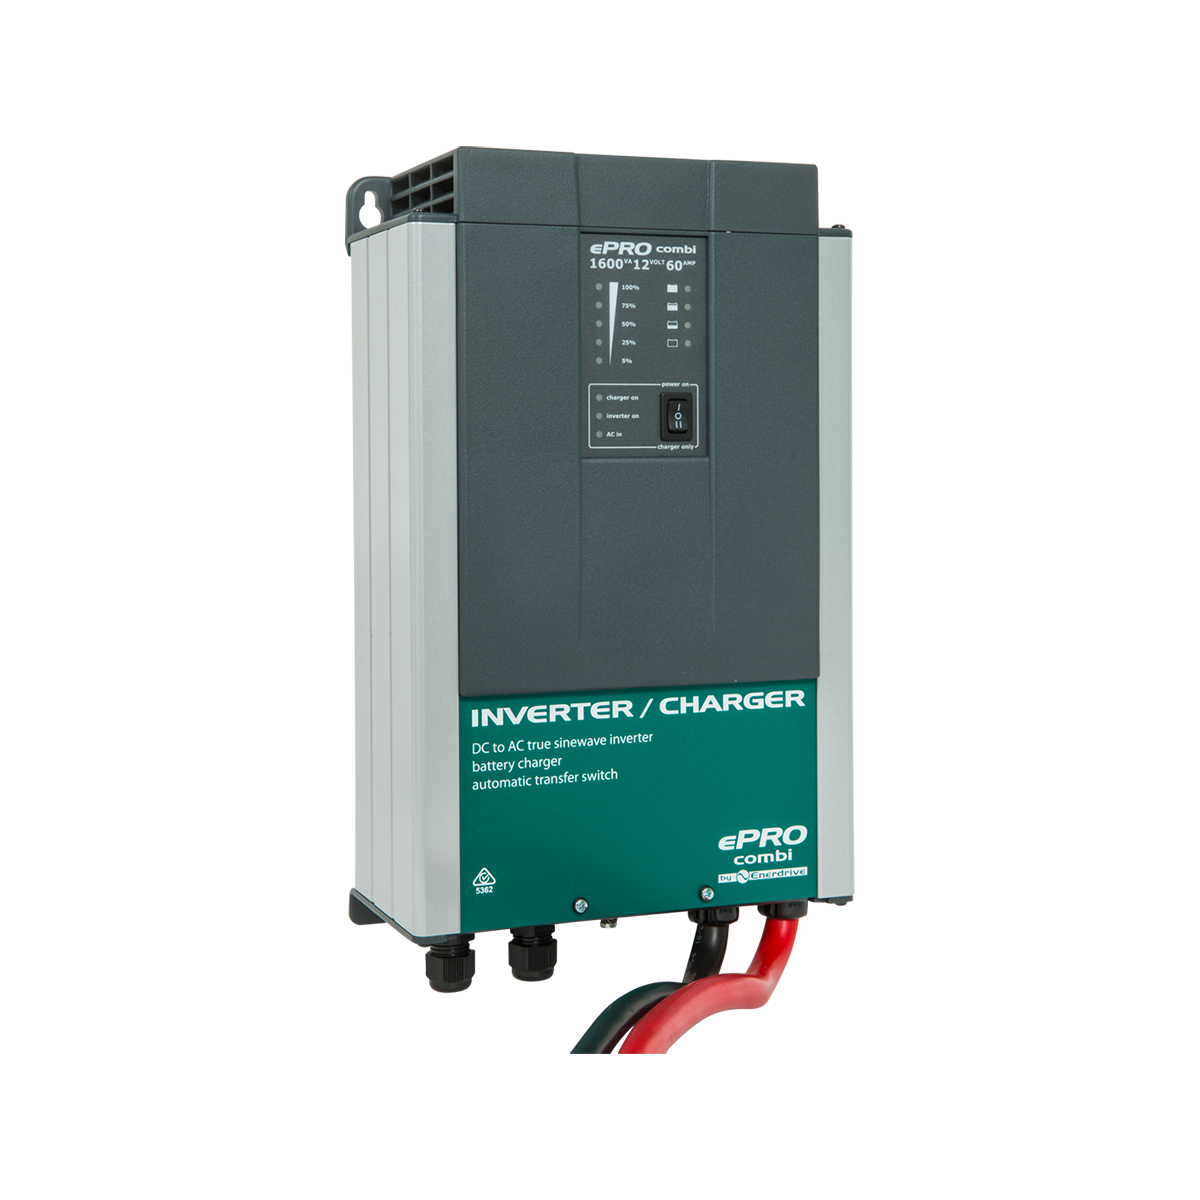 Enerdrive The Wanderer Power System 40A DC-DC Charger 1600W 60A Inverter Charger & Simarine Monitor